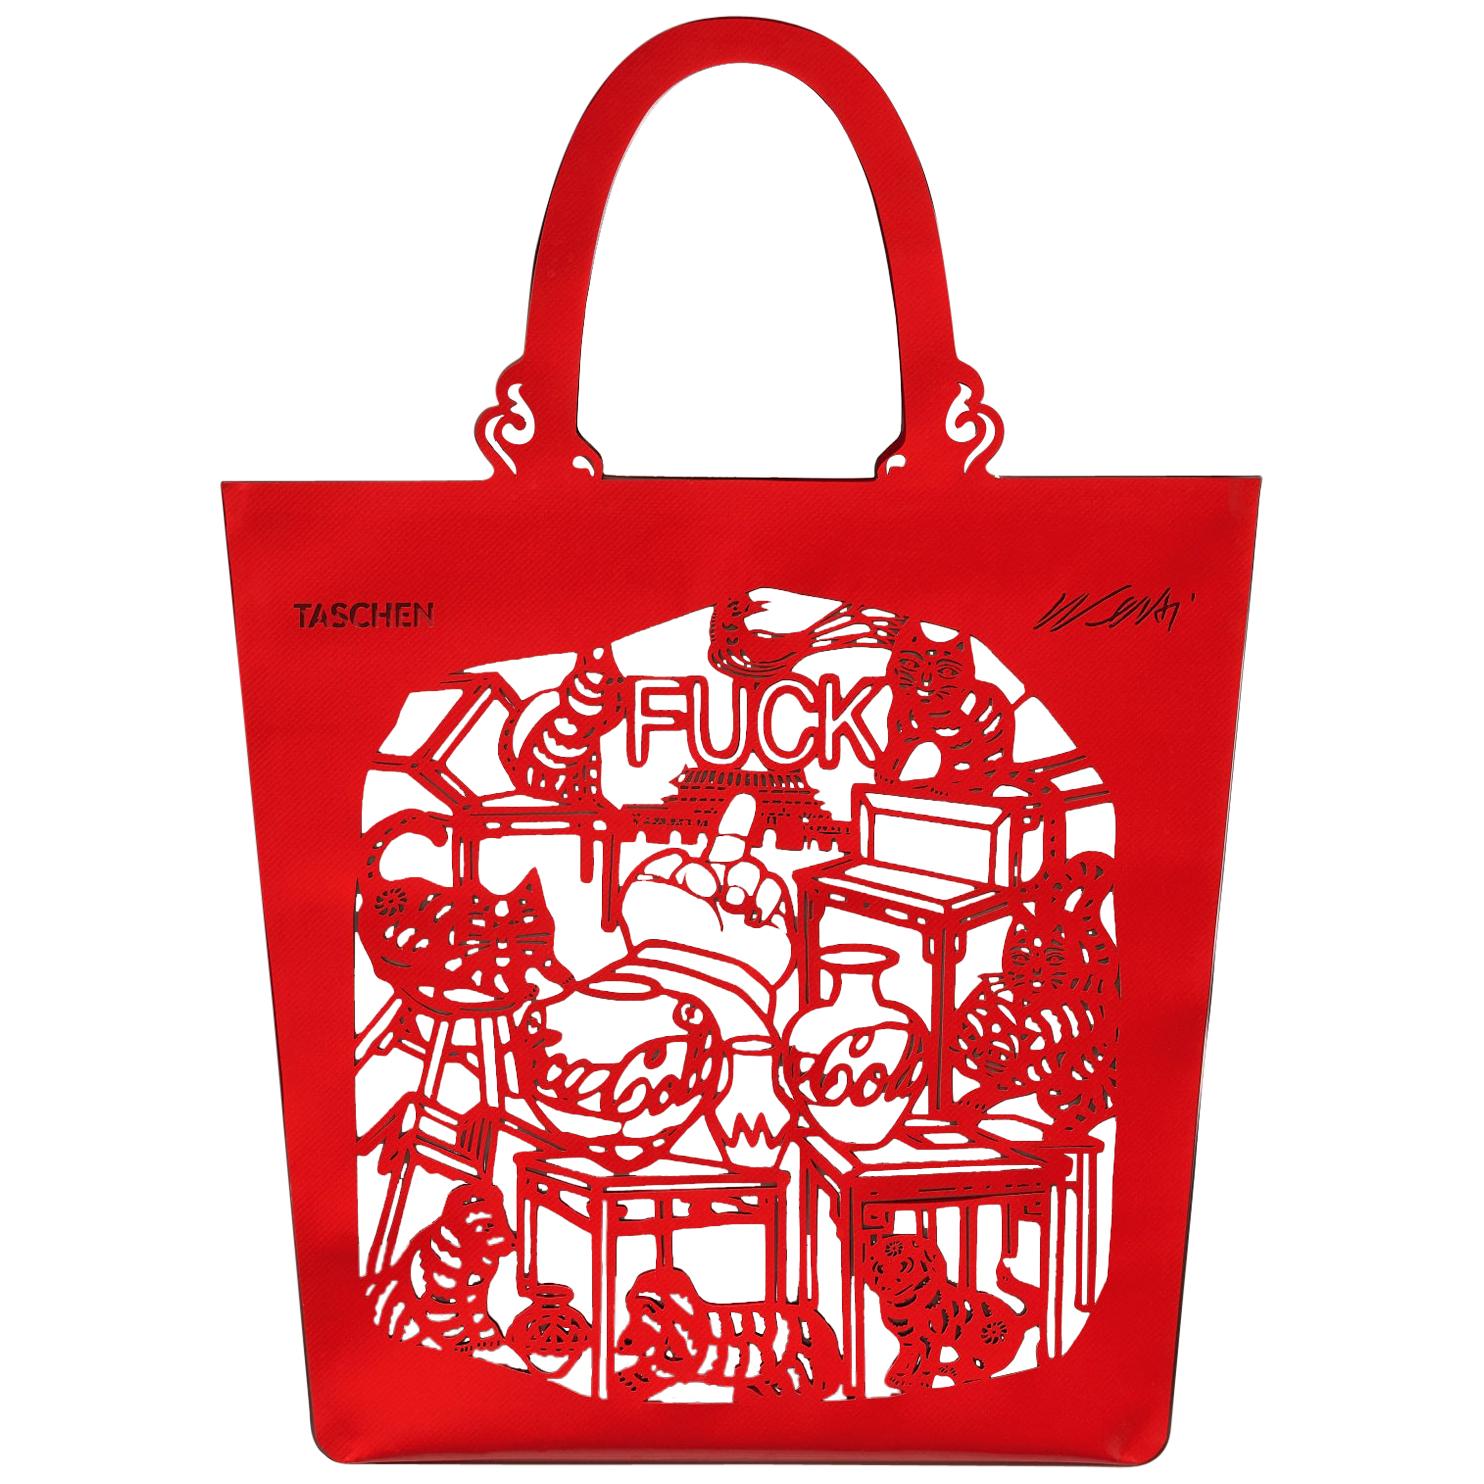 The China Bag 'Cats & Dogs' Tote by Ai Weiwei